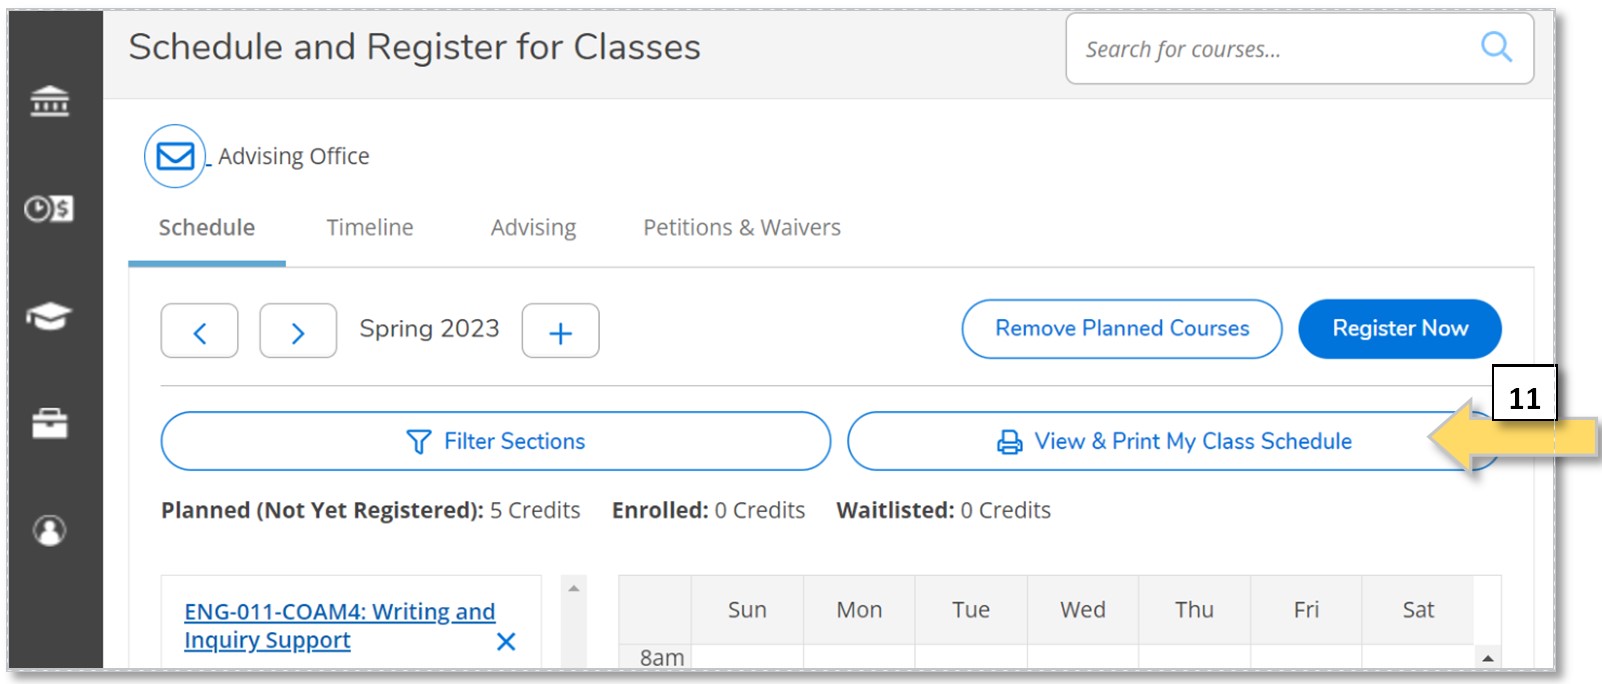 Screenshot of Self-Service "Schedule and Register for Classes" screen